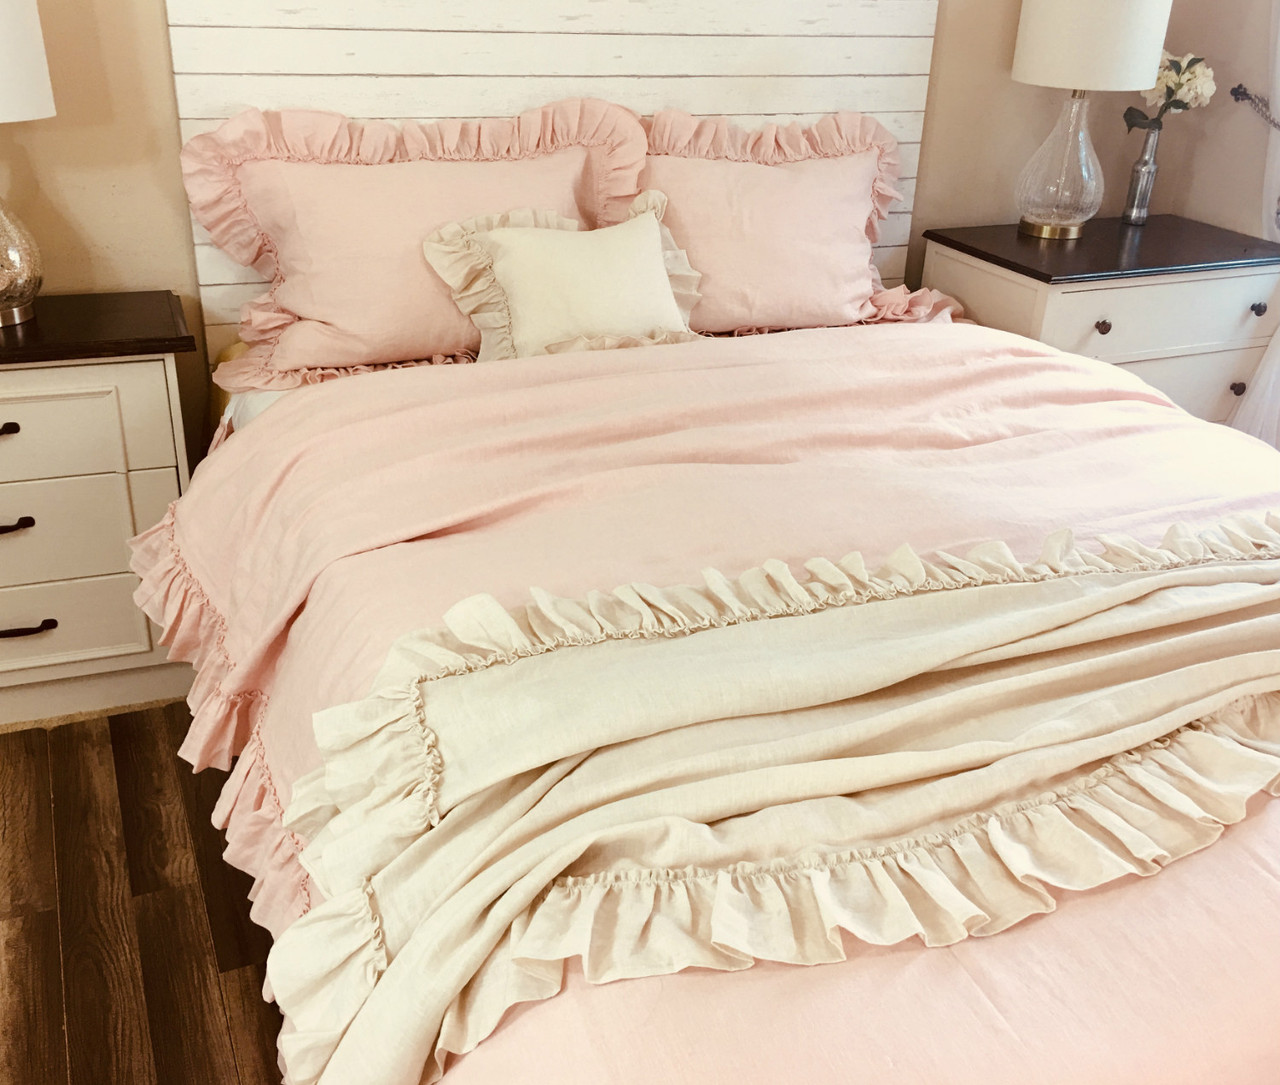 Dogwood Pink Linen Duvet Cover With Country Mermaid Long Ruffles